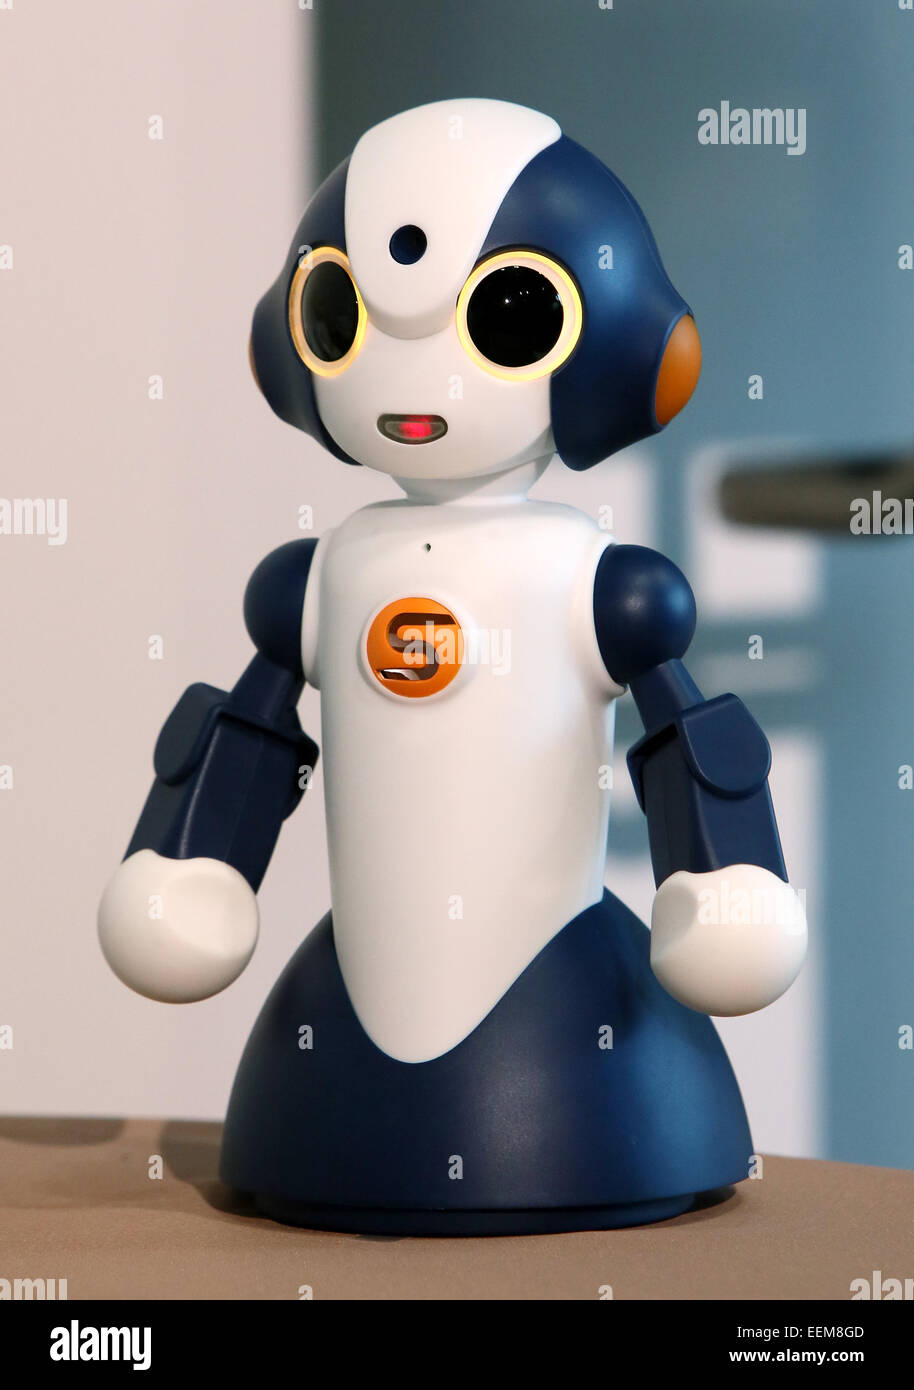 Tokyo, Japan. 20th Jan, Talking robot "Sota" is introduced to the media in Tokyo on Tuesday, January 20, 2015. The 11-inch-tall button-eyed Sota, going on sale in July at under $850,